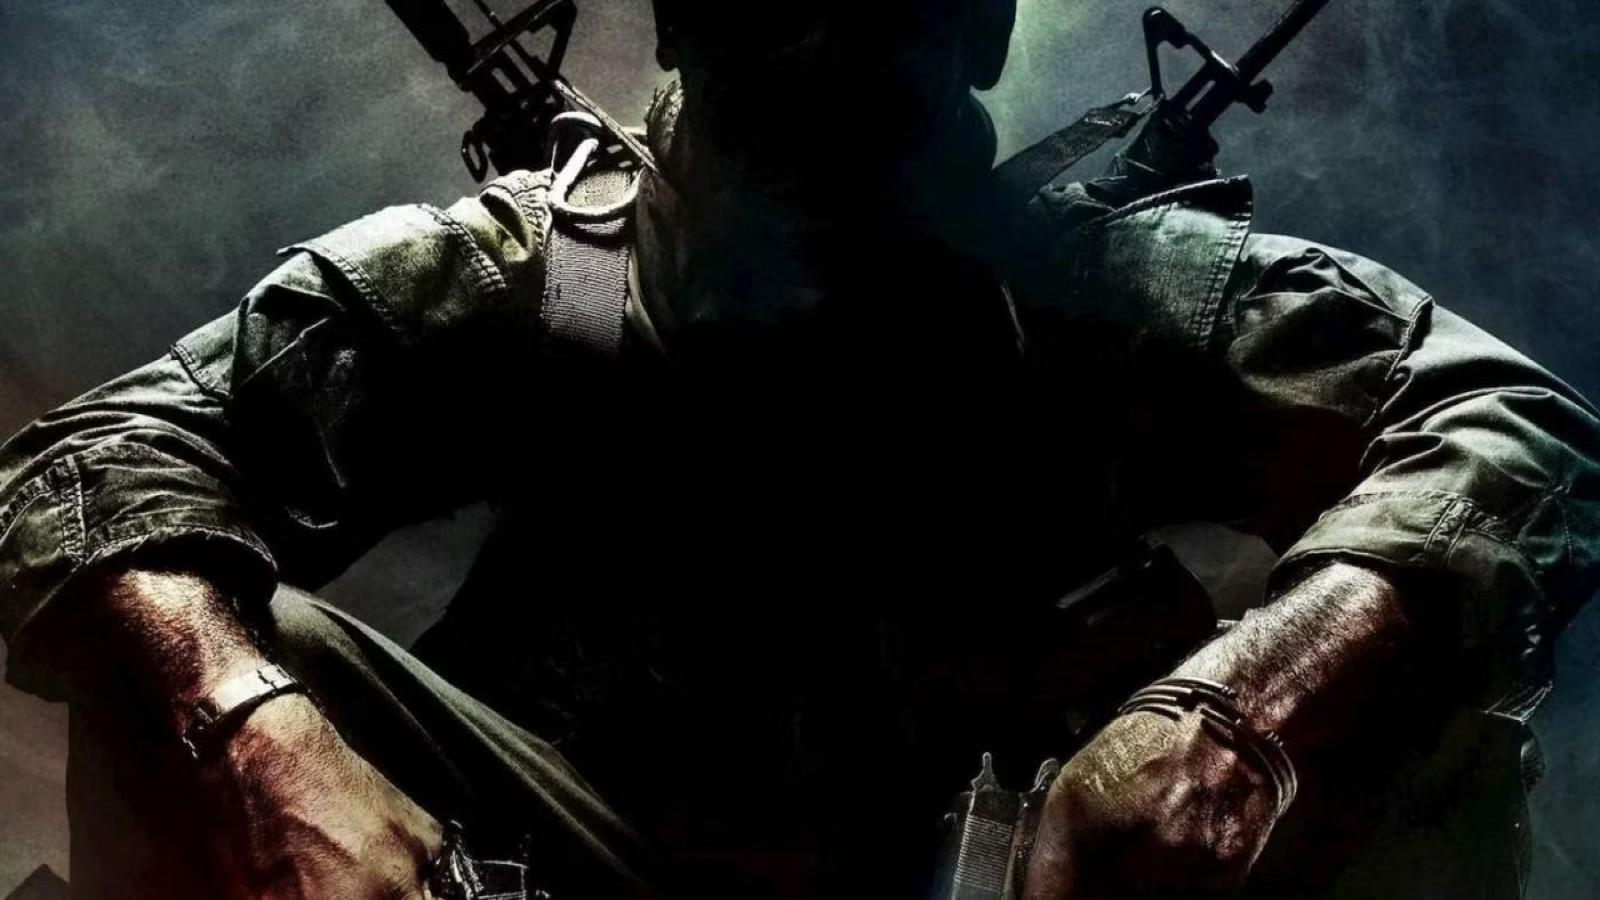 Are Black Ops 2 remakes being made? Rumors & leaks are about! - Game News 24